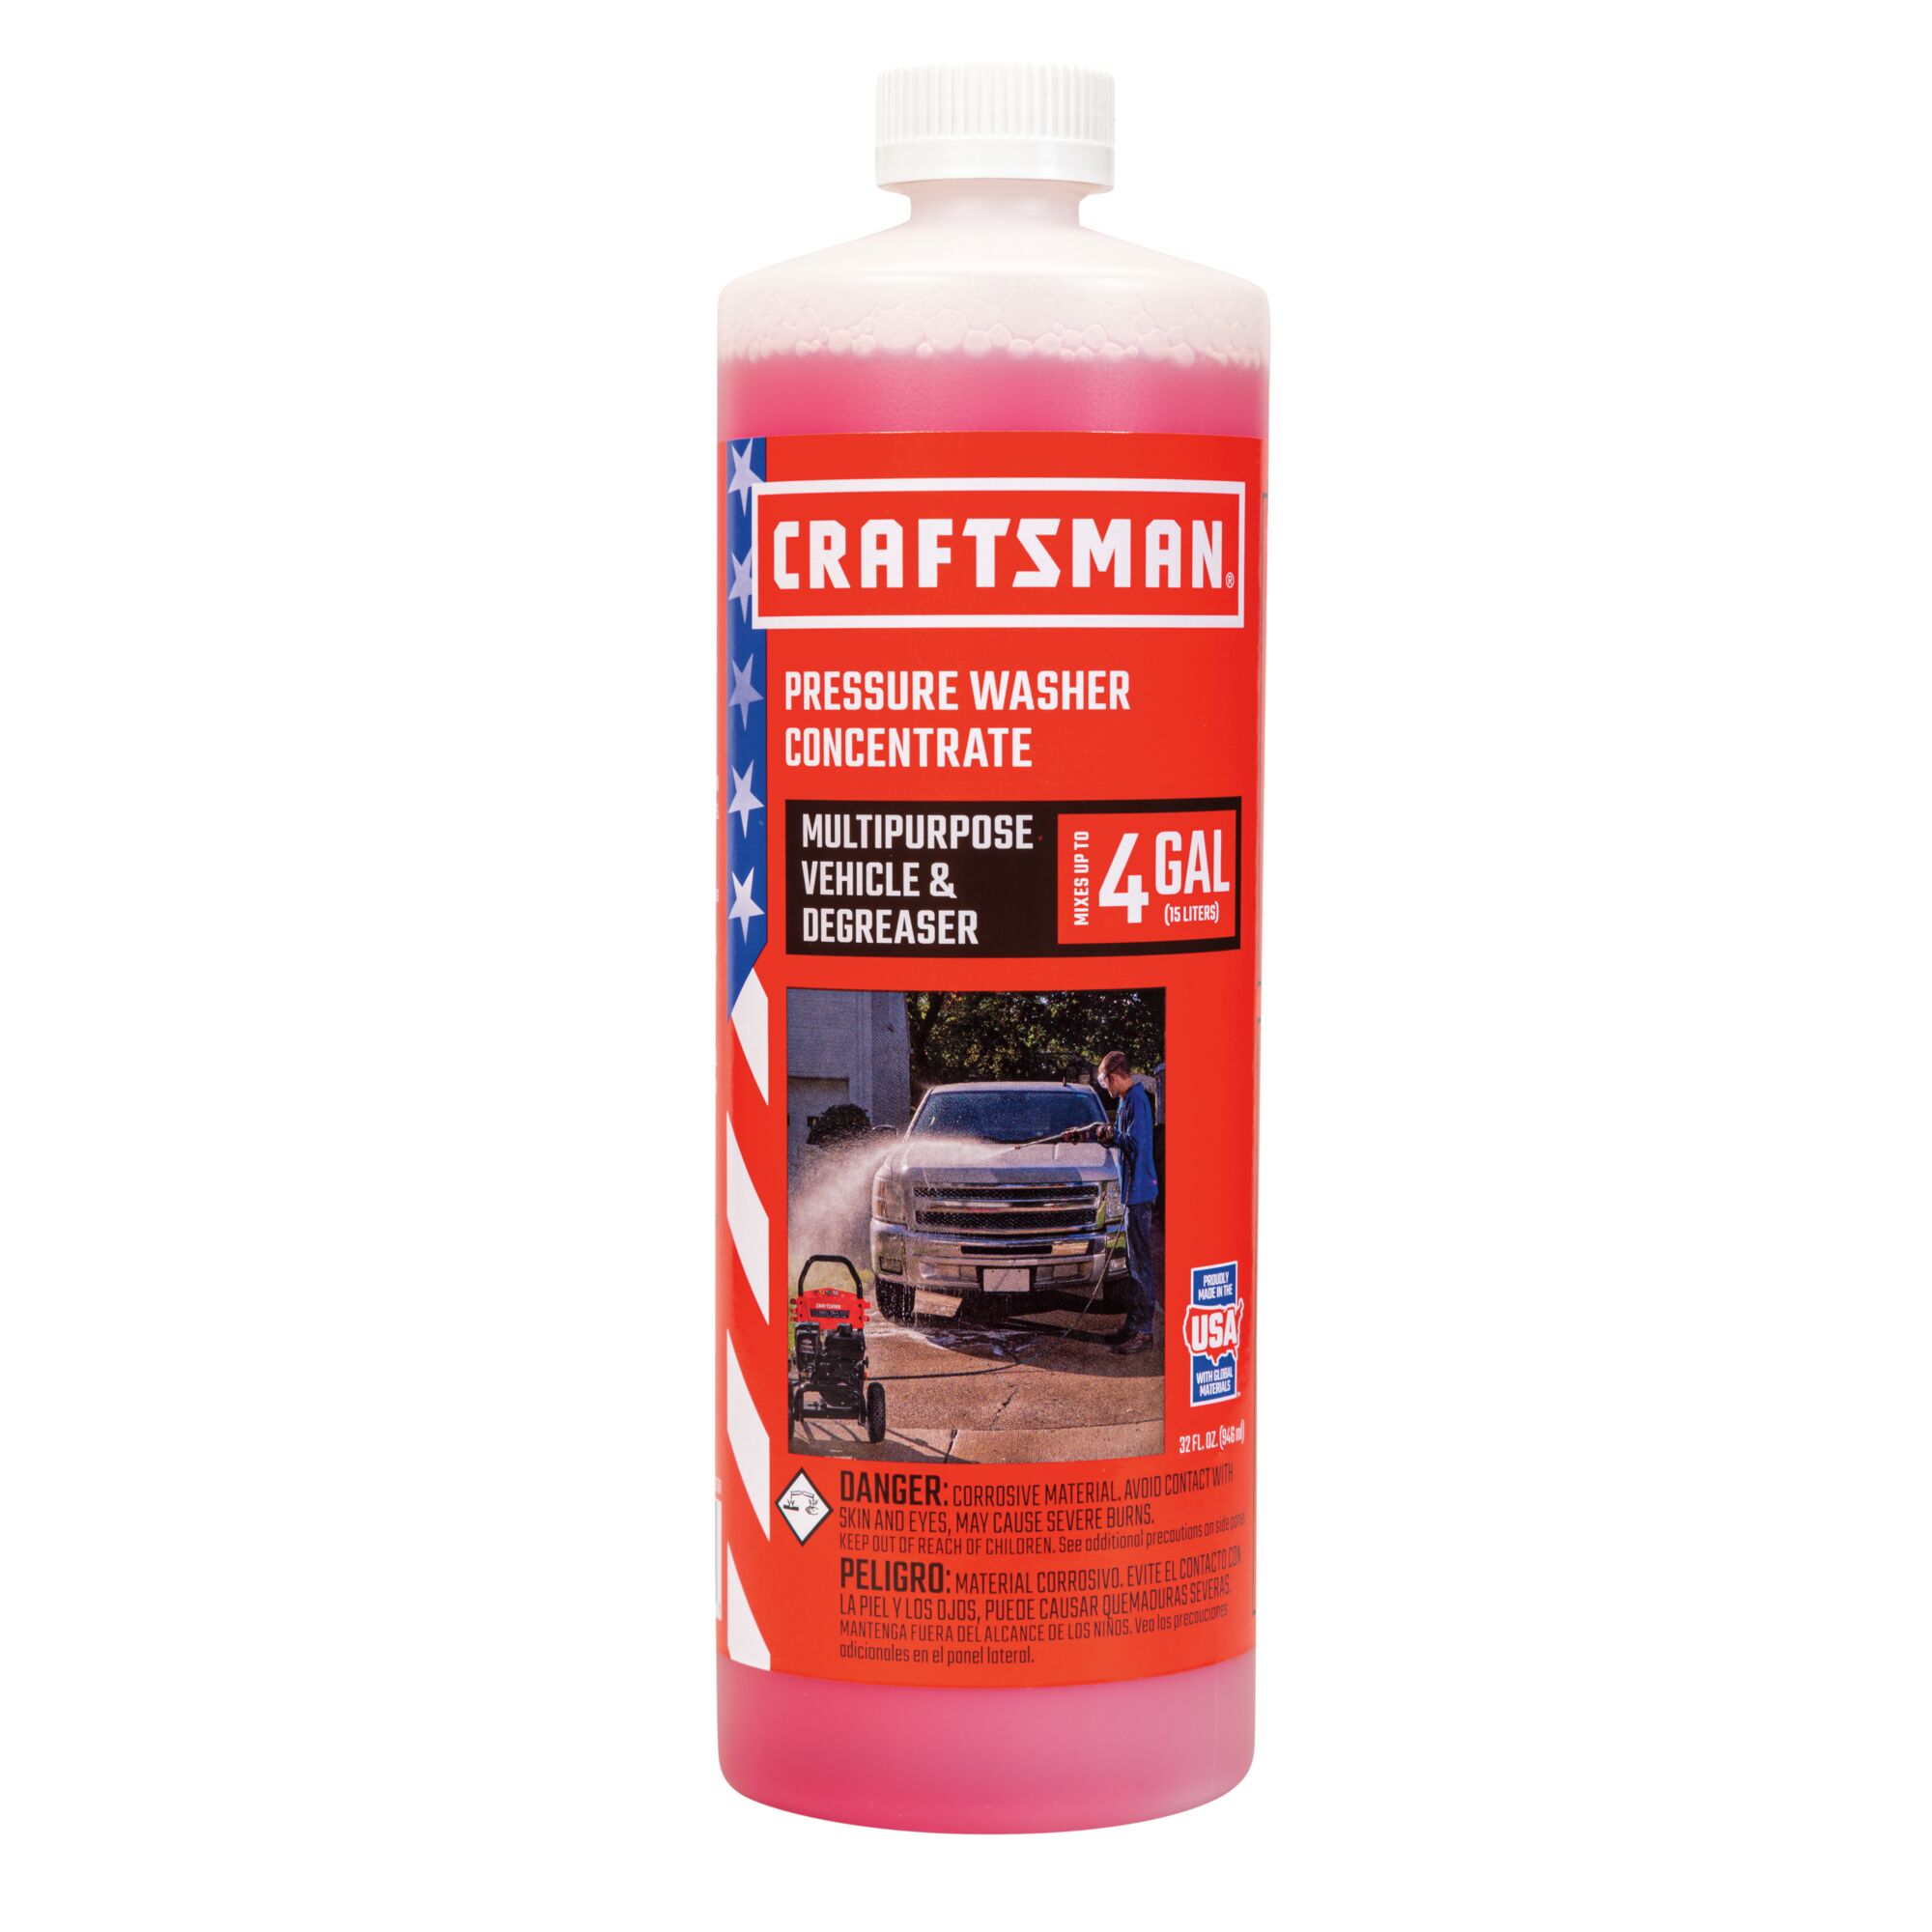 Multipurpose vehicle and degreaser pressure washer concentrate.